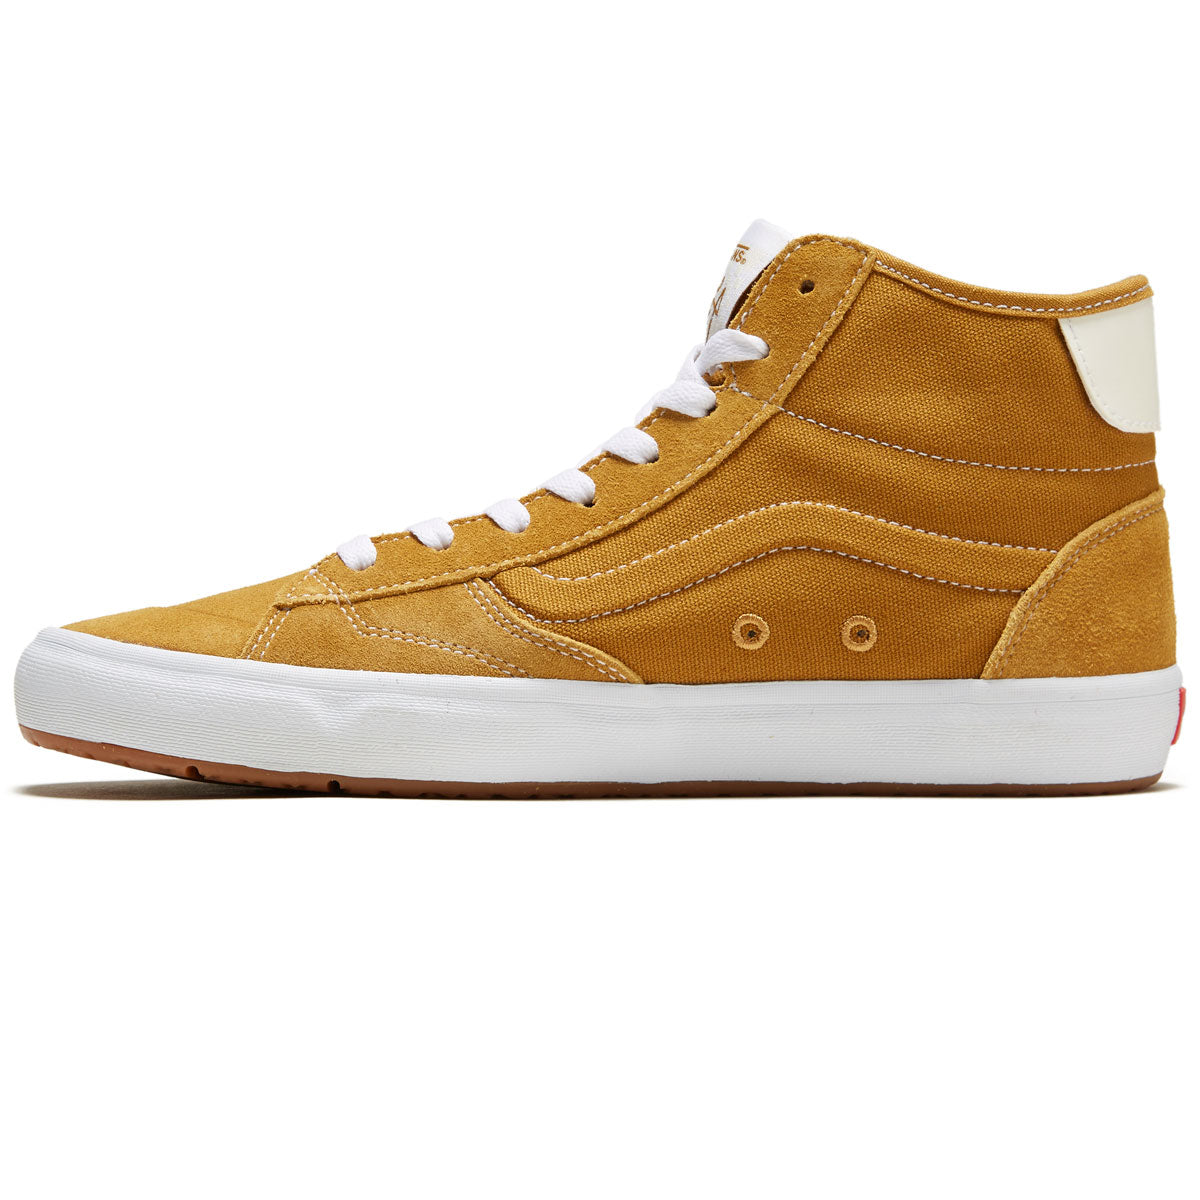 Vans The Lizzie Shoes - Gold/White image 2